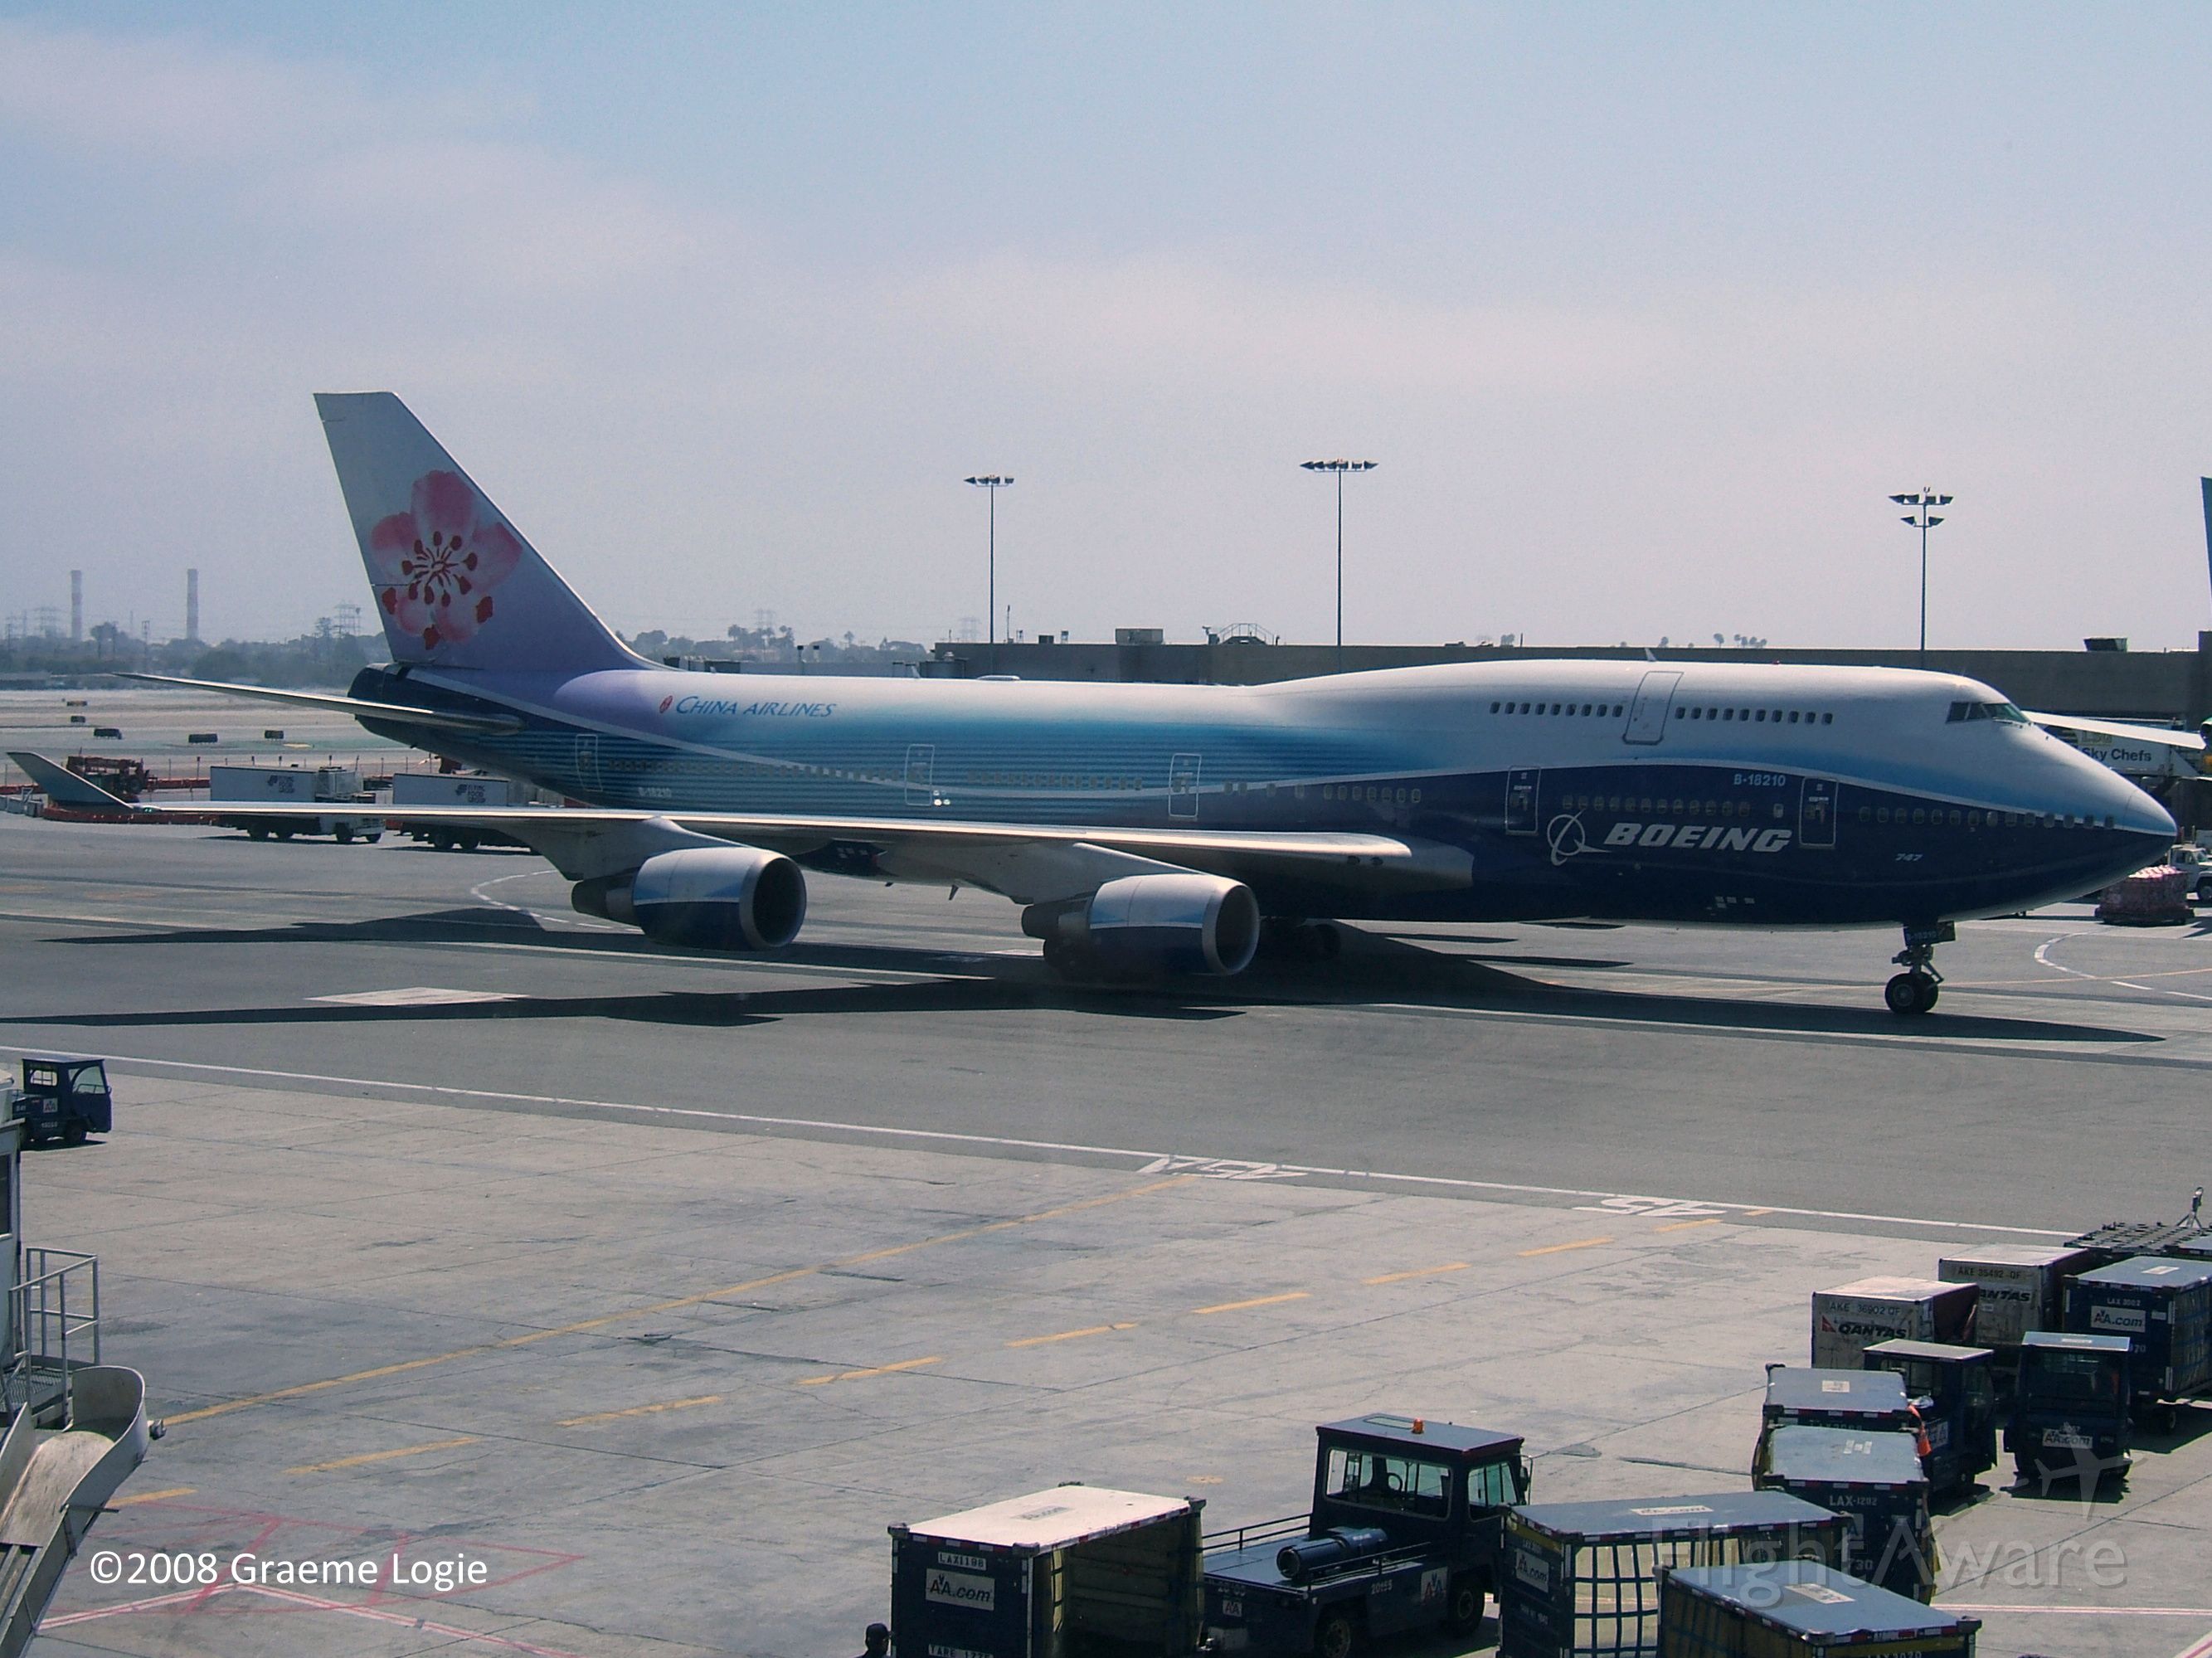 Boeing 747-400 (B-18210) - From the American Airlines Admirals Club at LAX.